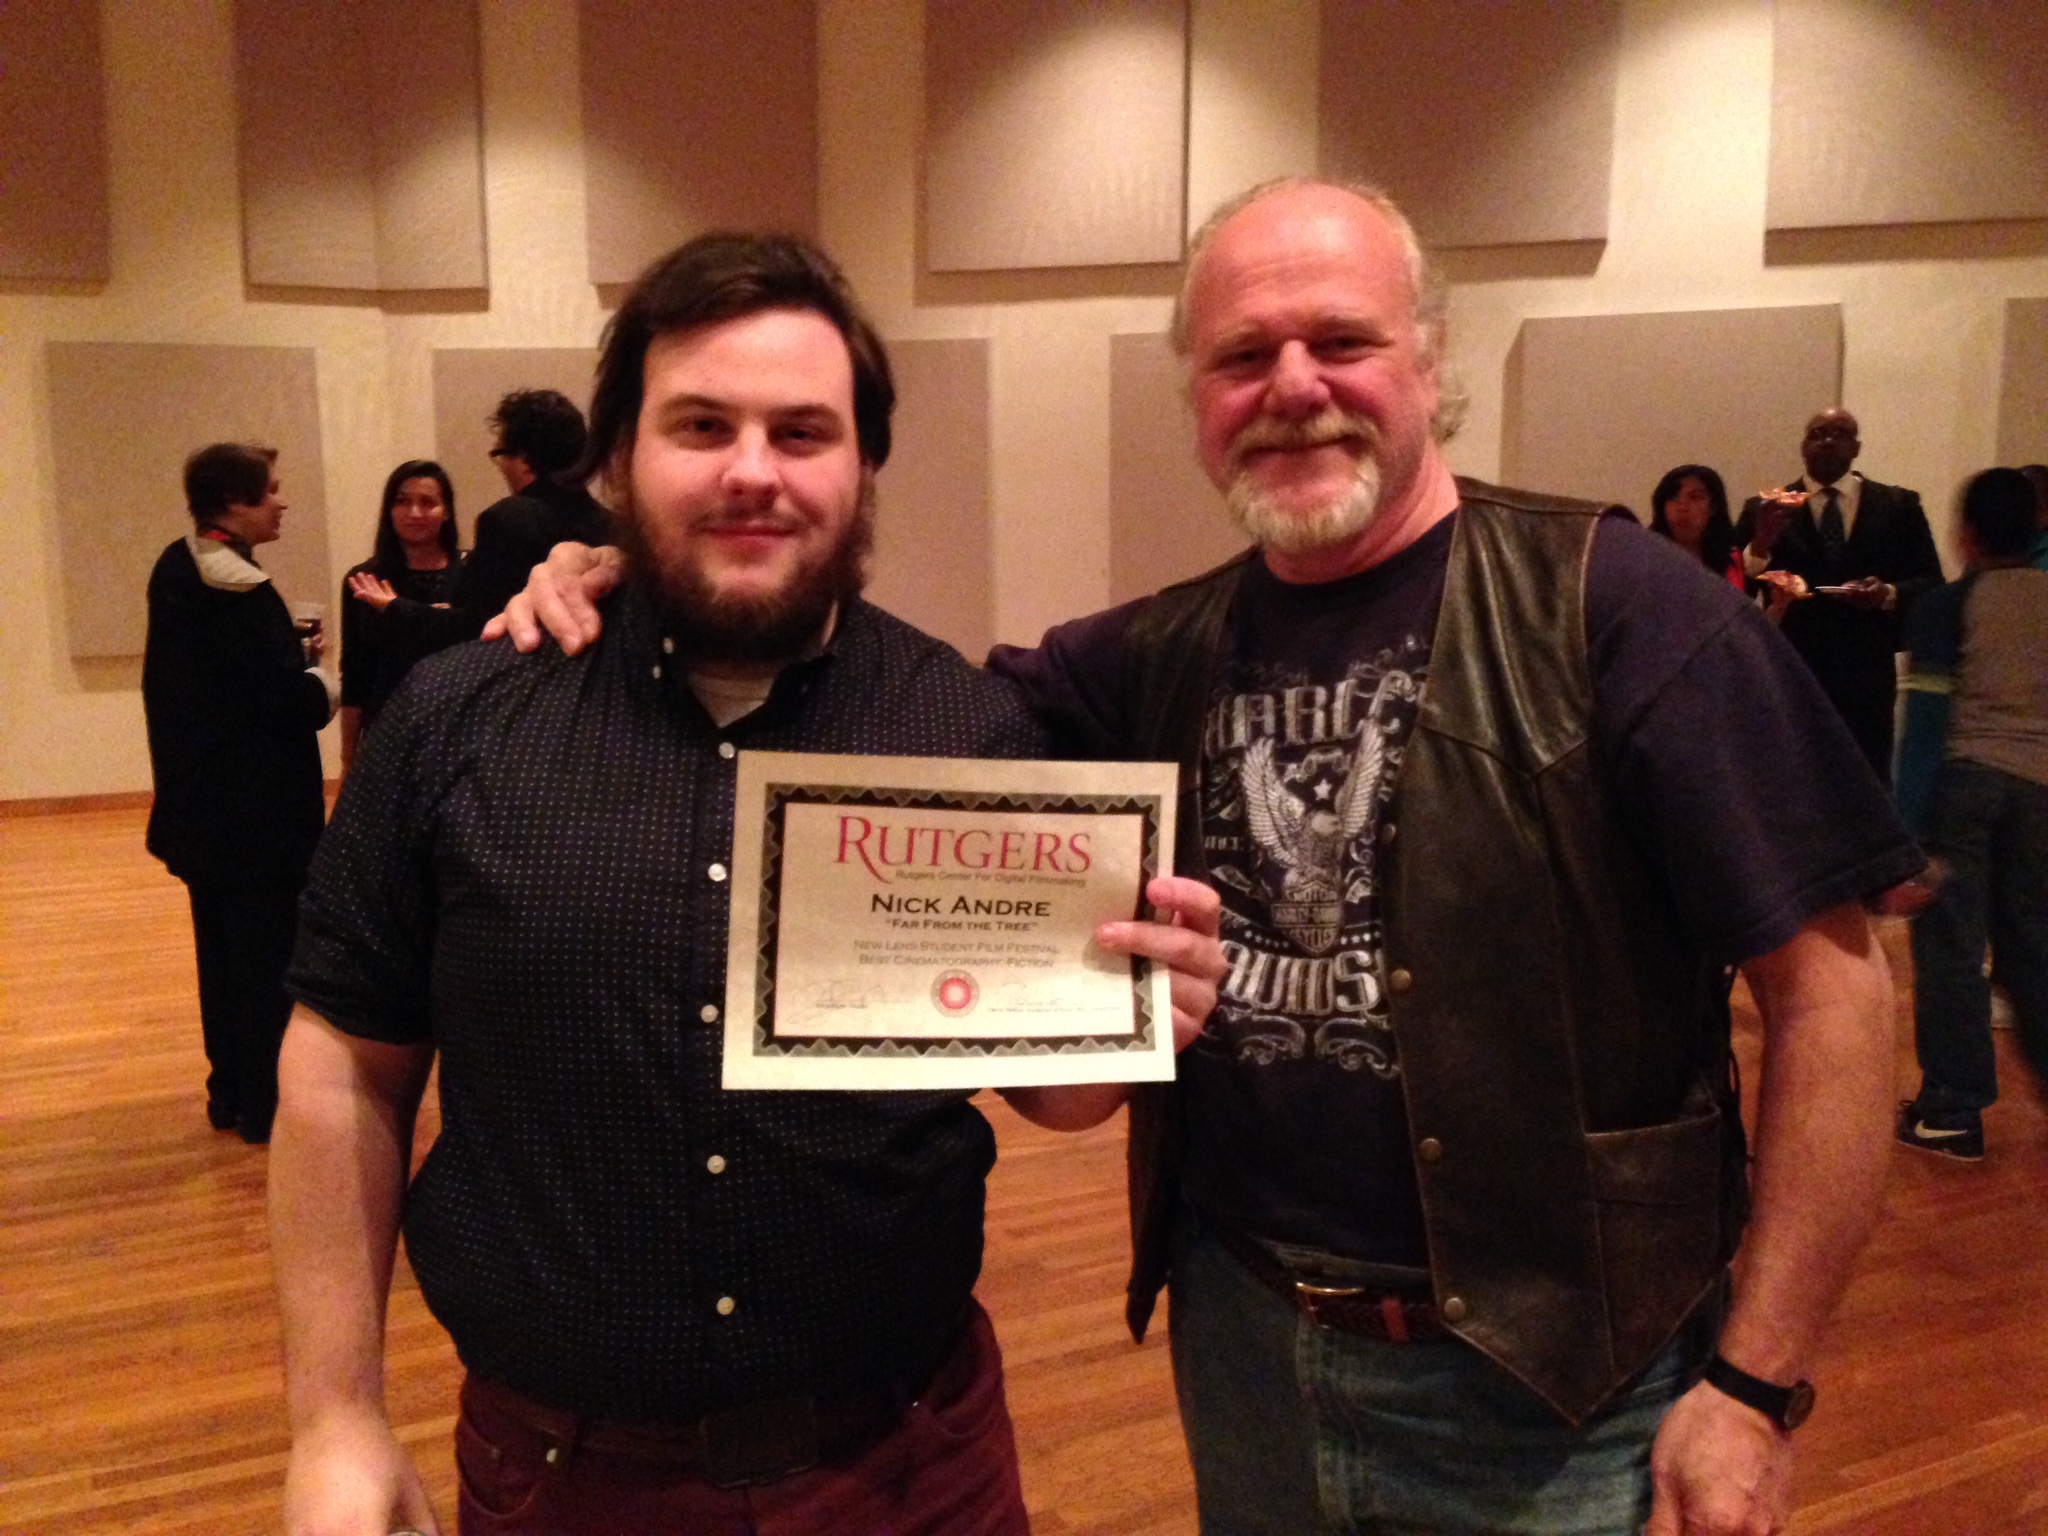 Myself with Award Winning Director Nicholas H. Andre for 